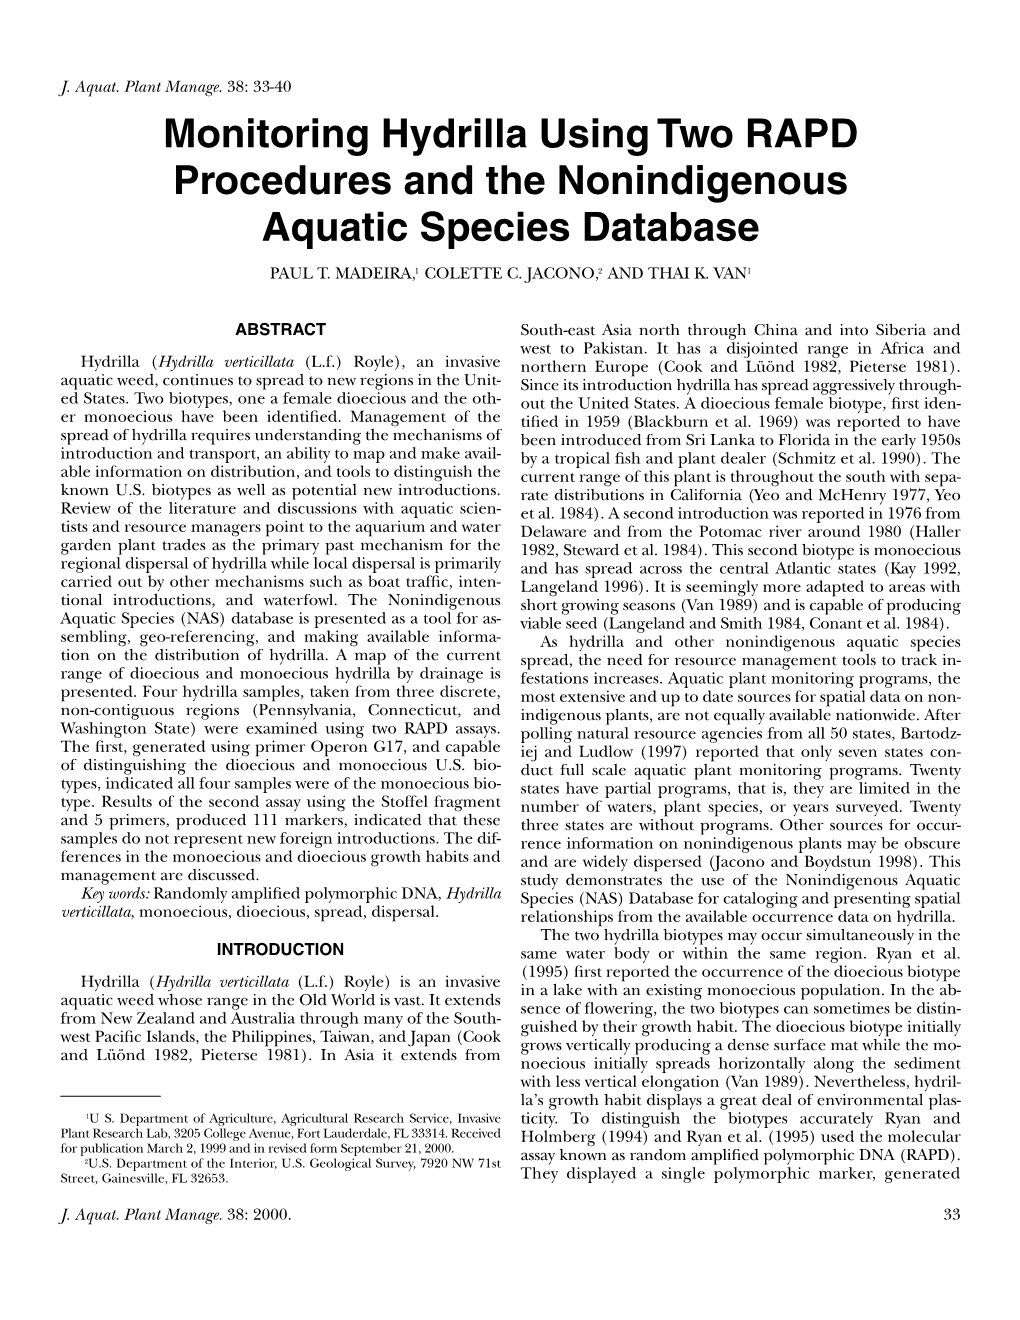 Monitoring Hydrilla Using Two RAPD Procedures and the Nonindigenous Aquatic Species Database